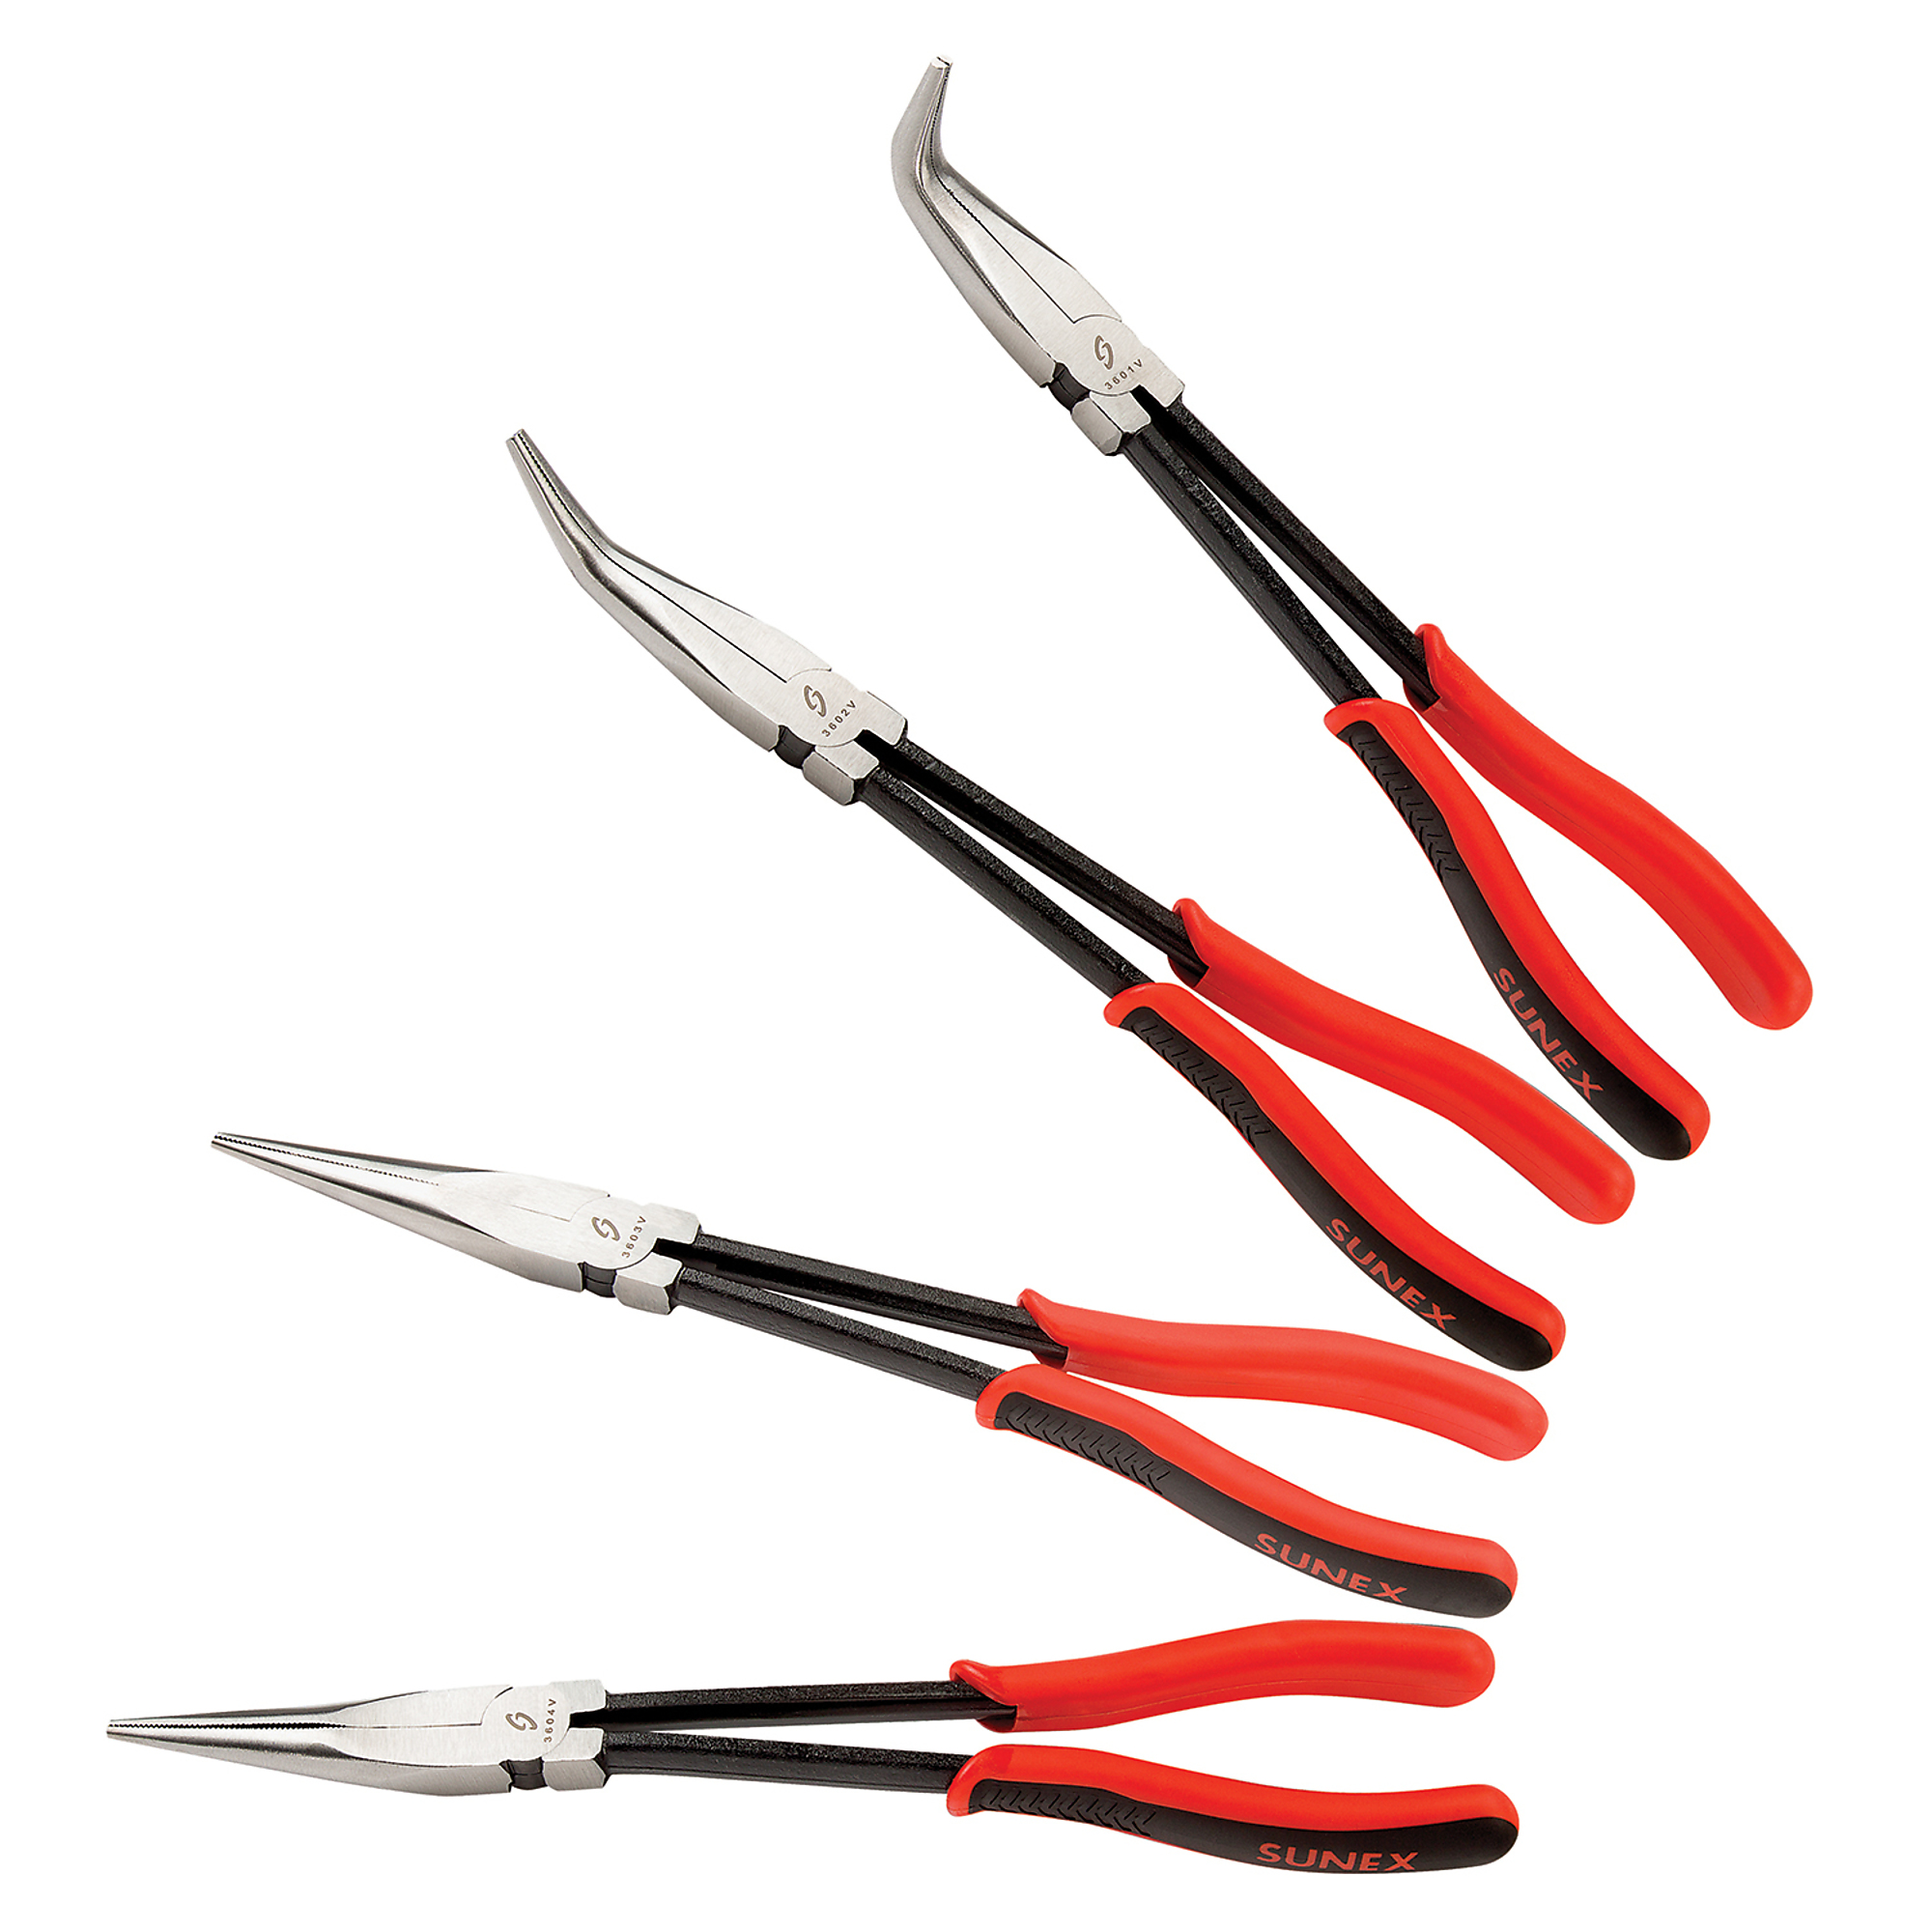 Sunex Tools, 11Inch, Long Reach Plier Set, 4-Piece, Pieces (qty.) 1, Material Alloy Steel, Jaw Capacity 1 in, Model 3600V